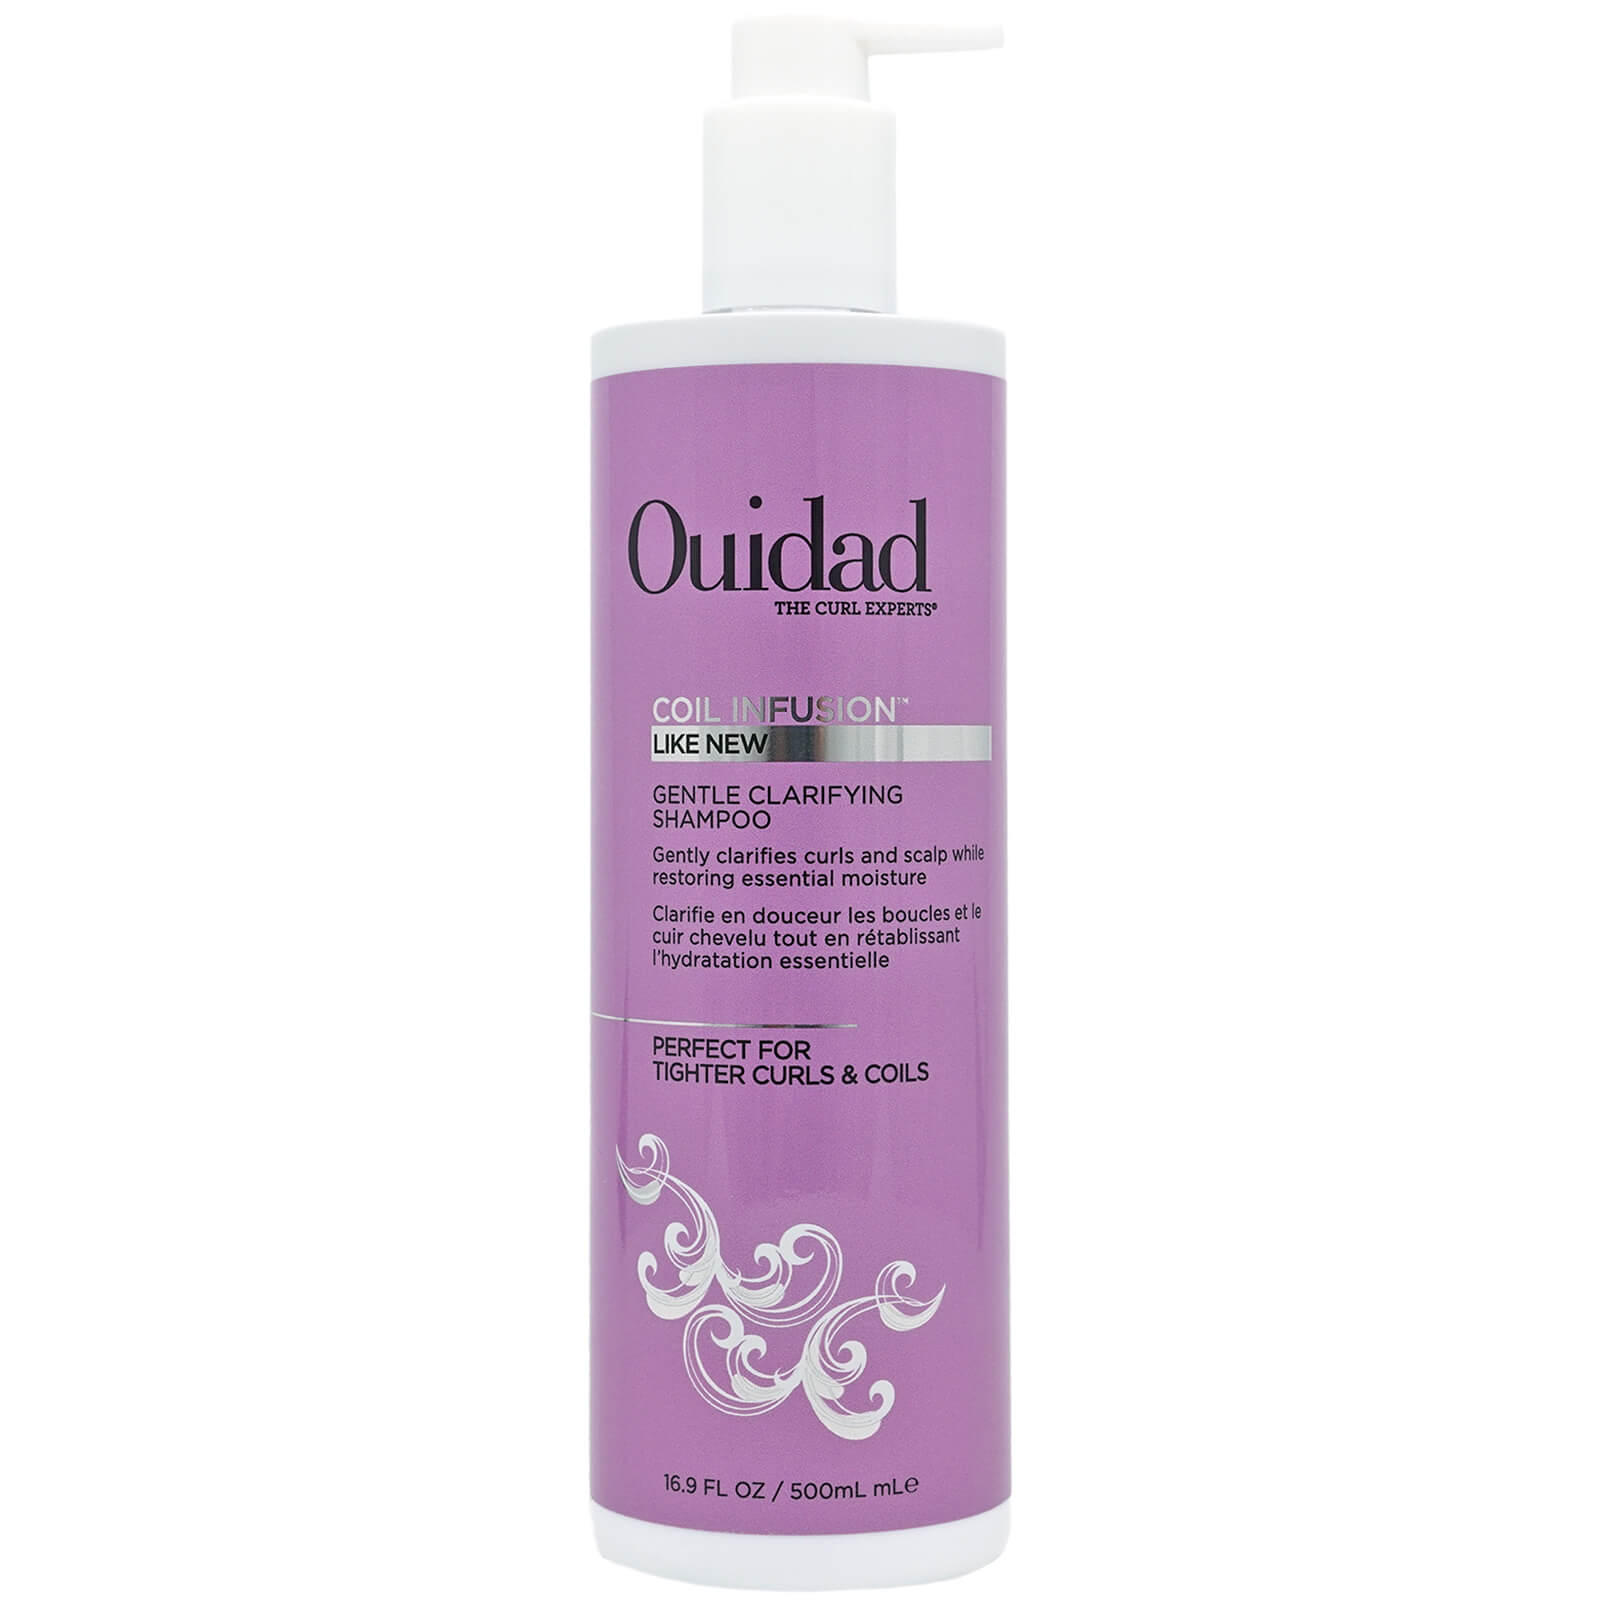 Ouidad Coil Infusion Like New Gentle Clarifying Shampoo 500ml von Ouidad